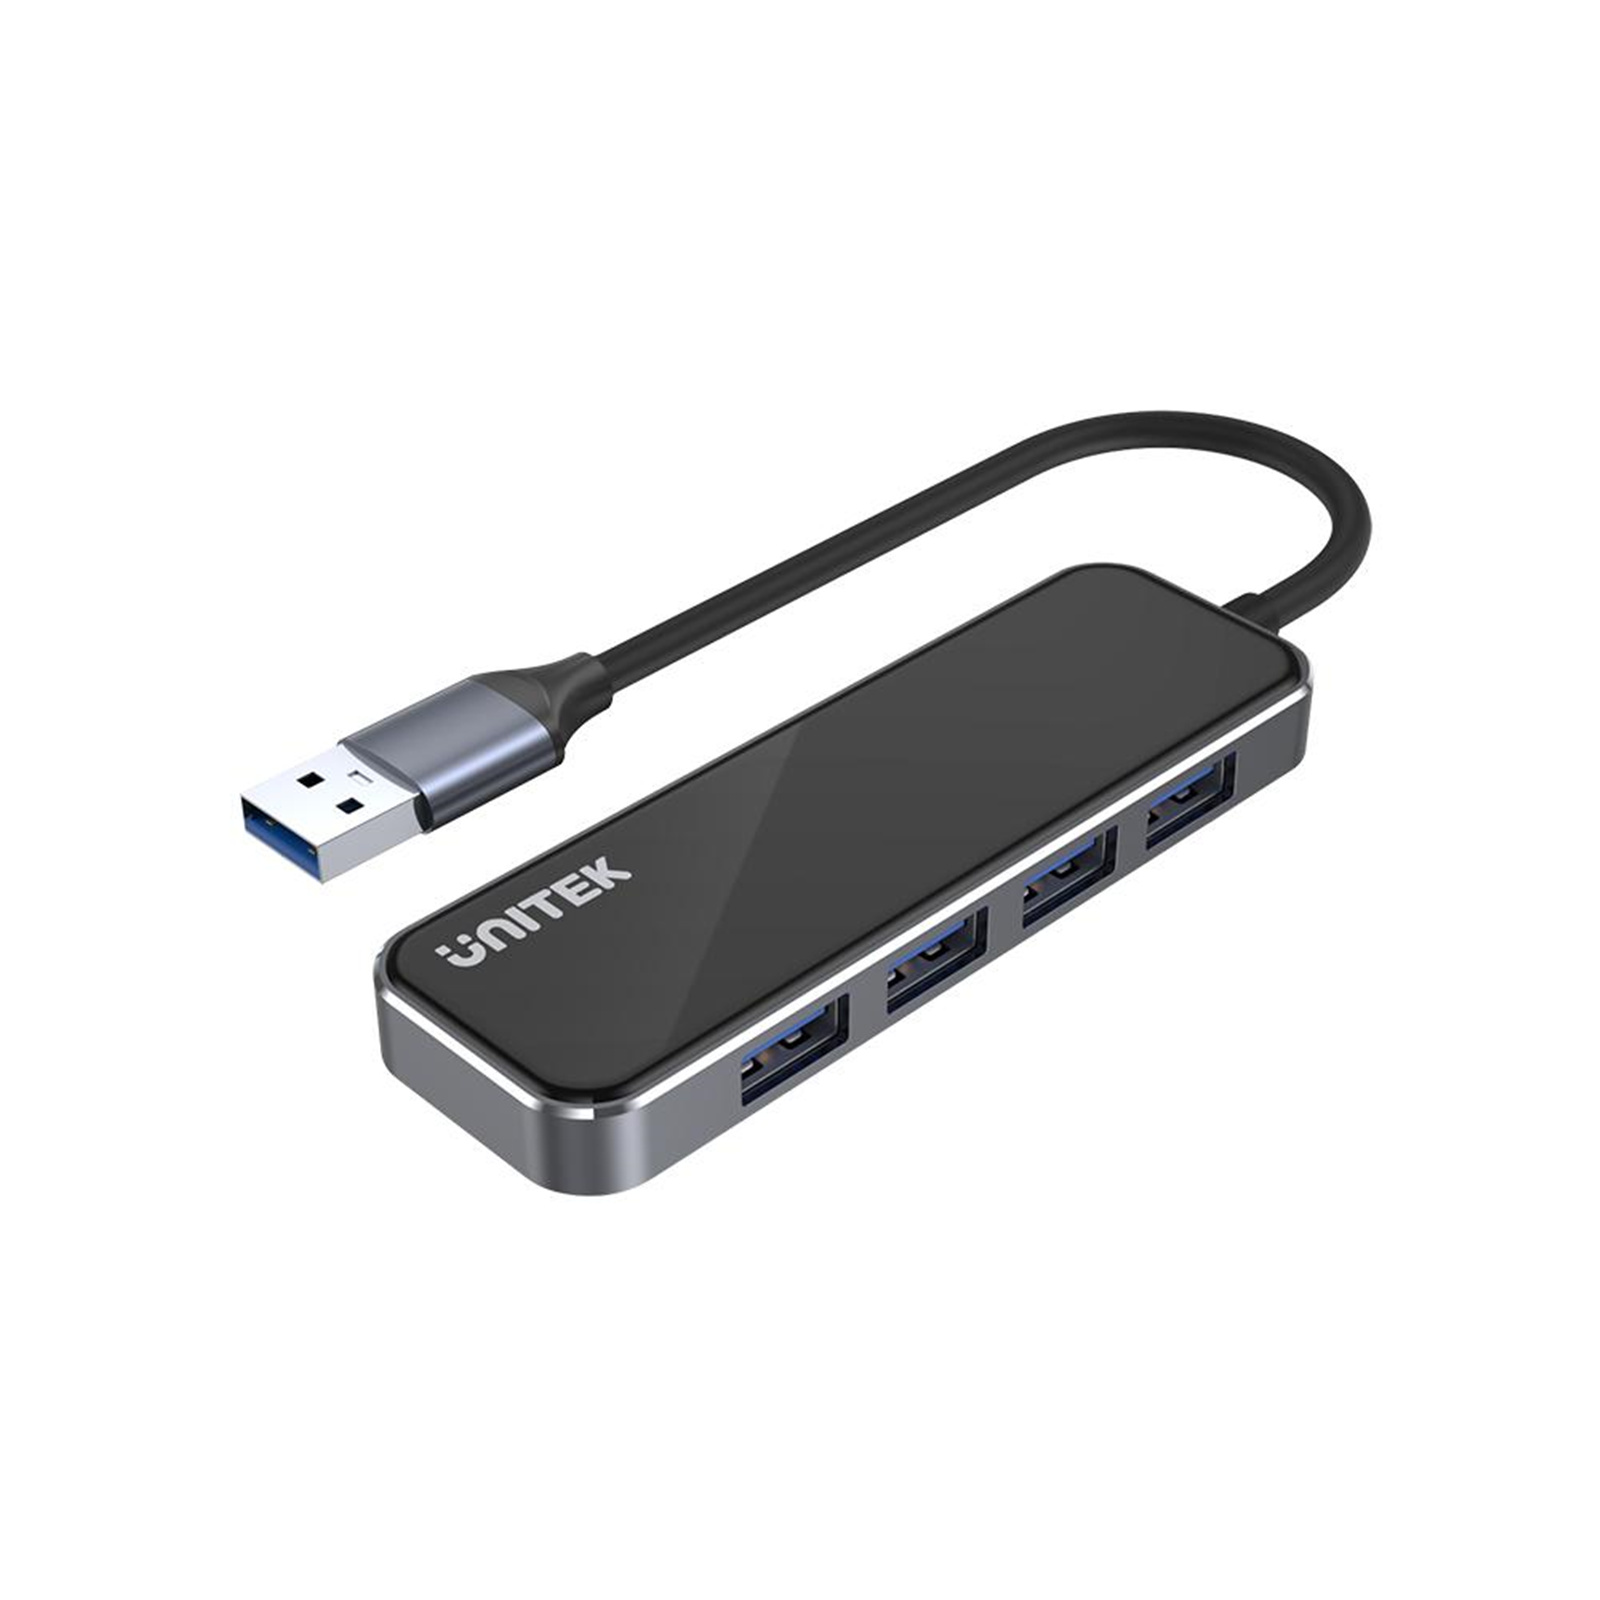 Buy the Unitek USB 3.1 Multi-Port with USB-A Includes... ( H1109A ) online -